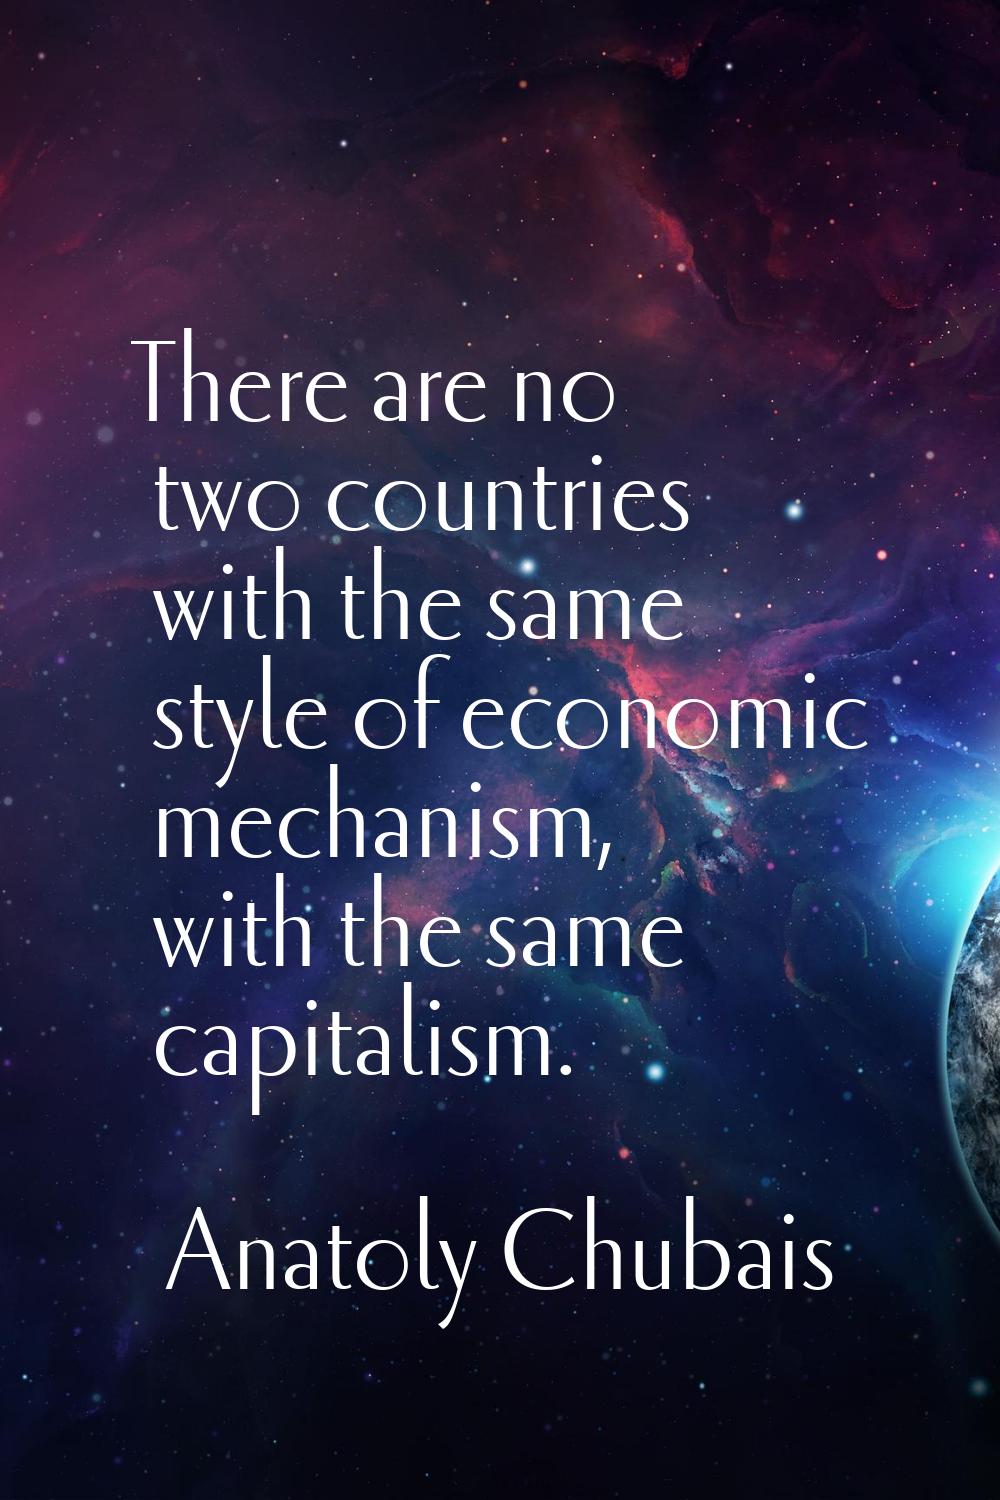 There are no two countries with the same style of economic mechanism, with the same capitalism.